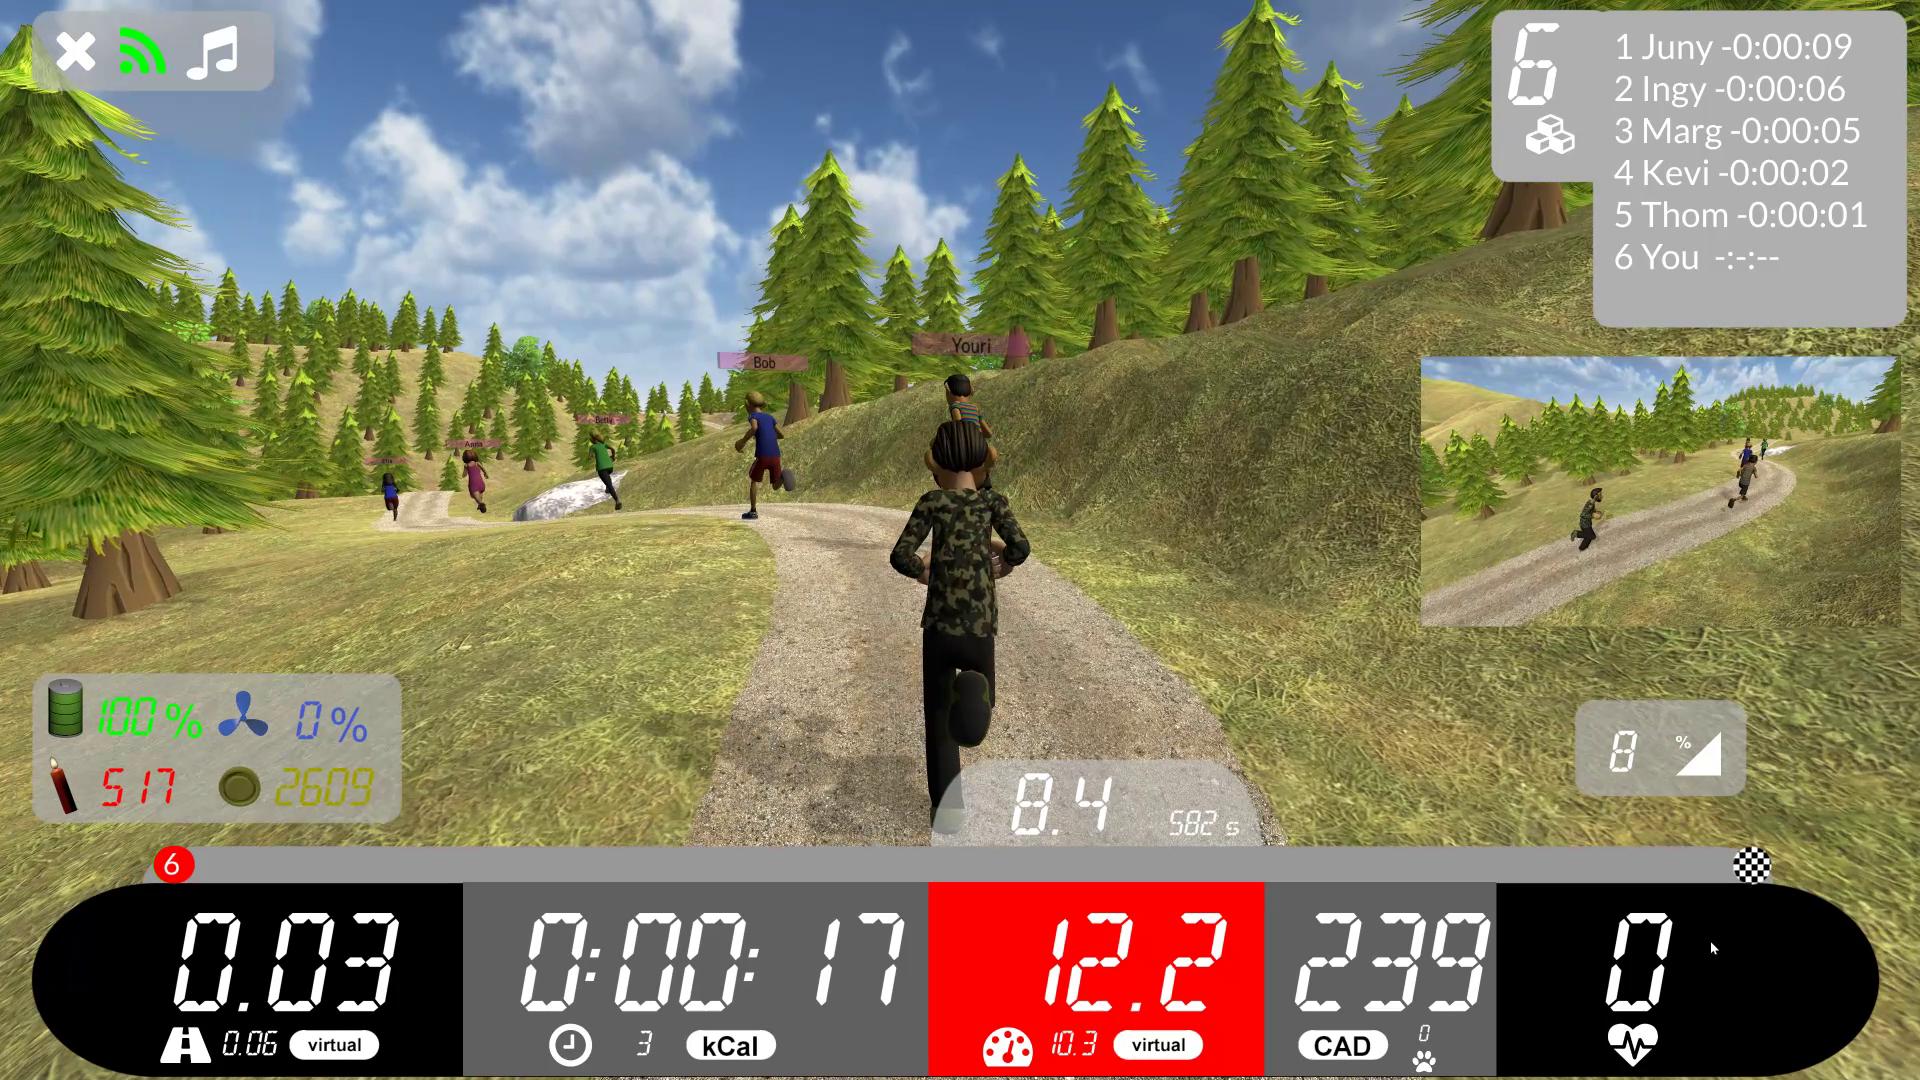 Arcade Fitness for Indoor Cycling or Treadmill Run for Android ...